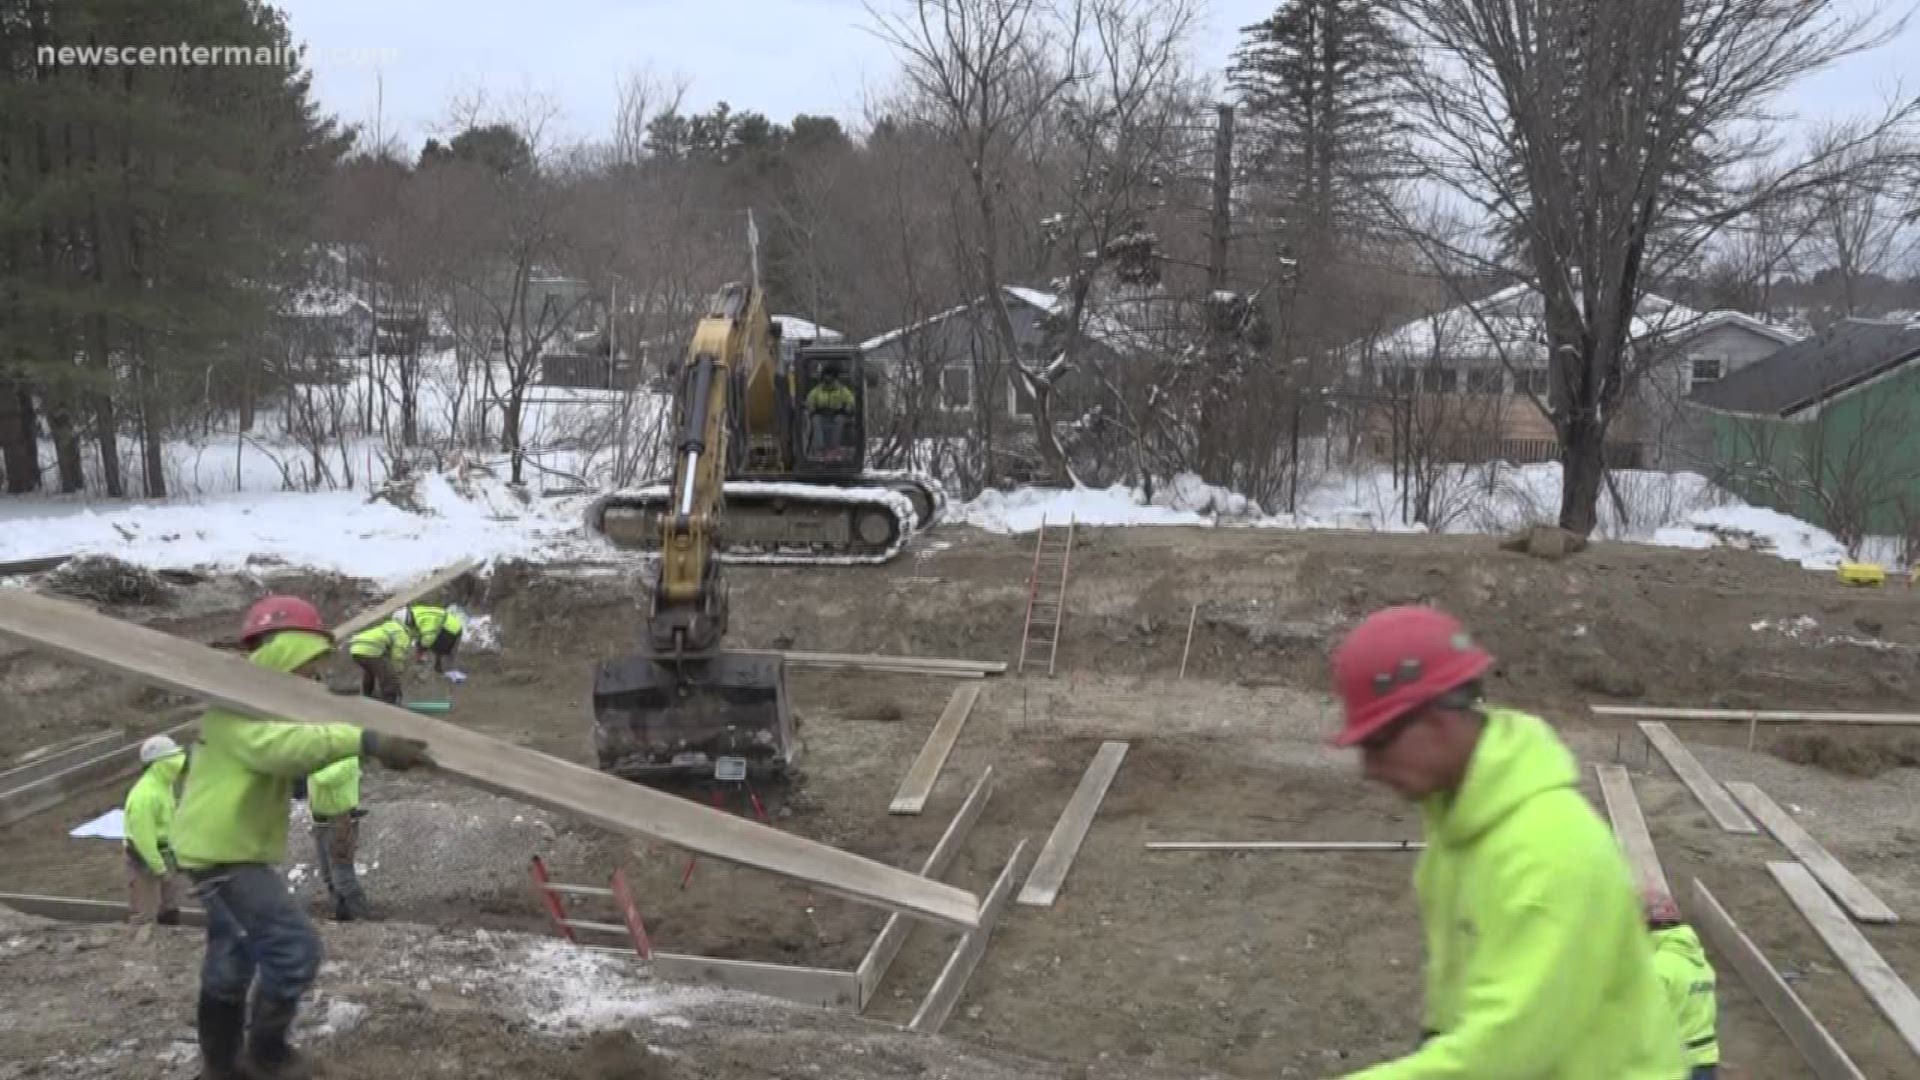 The Greater Bangor Habitat for Humanity is laying the foundation down for a first of its kind complex in eastern Maine.